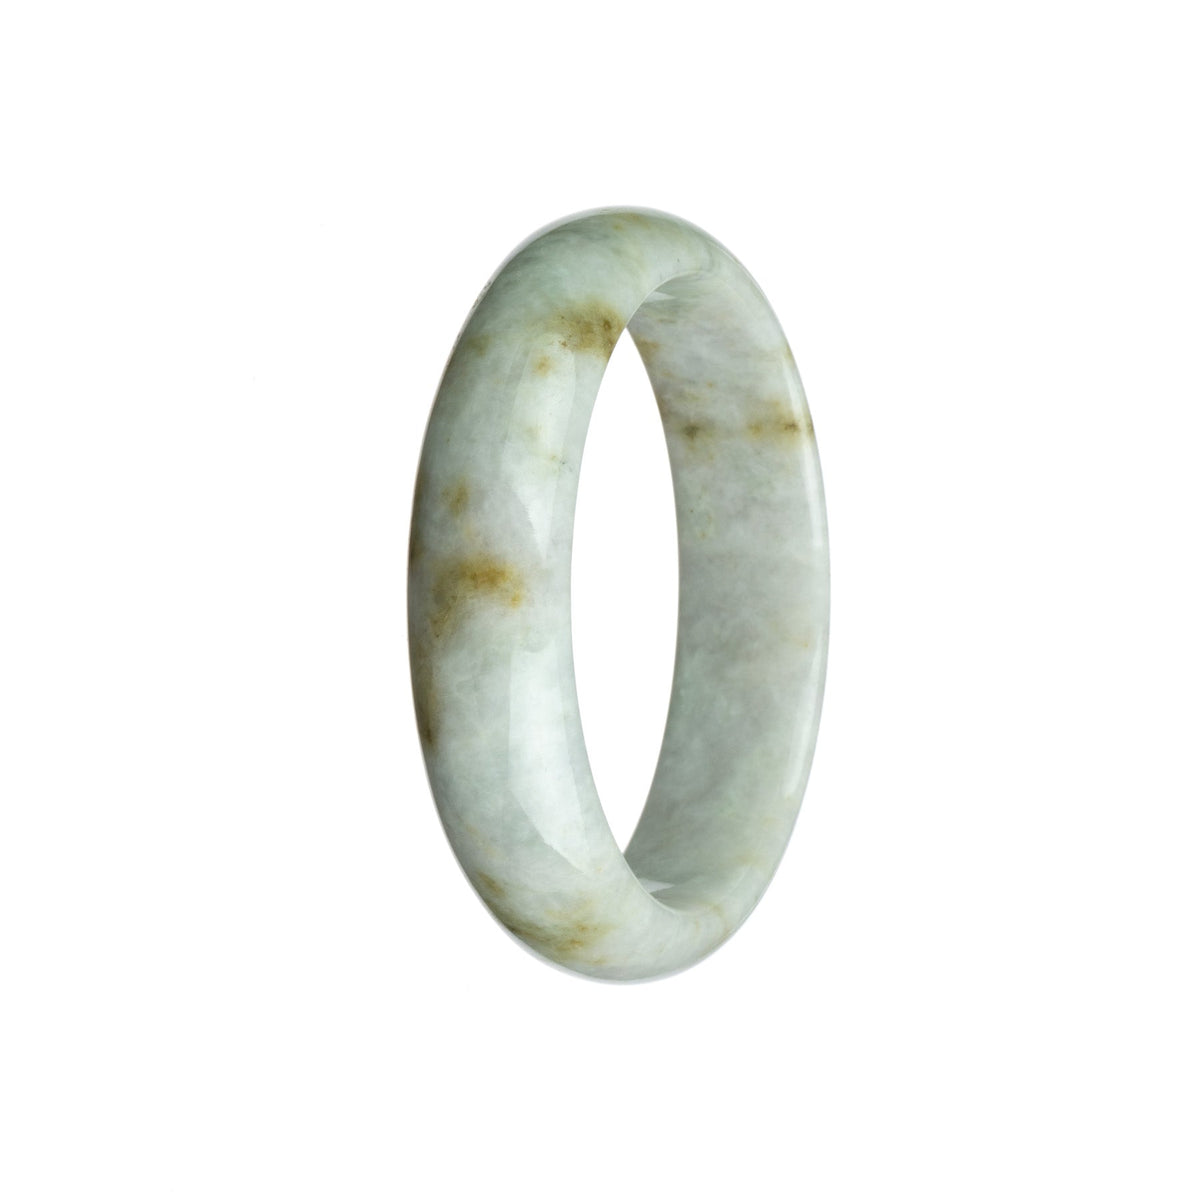 Certified Untreated White with Brown Pattern Traditional Jade Bracelet - 58mm Half Moon